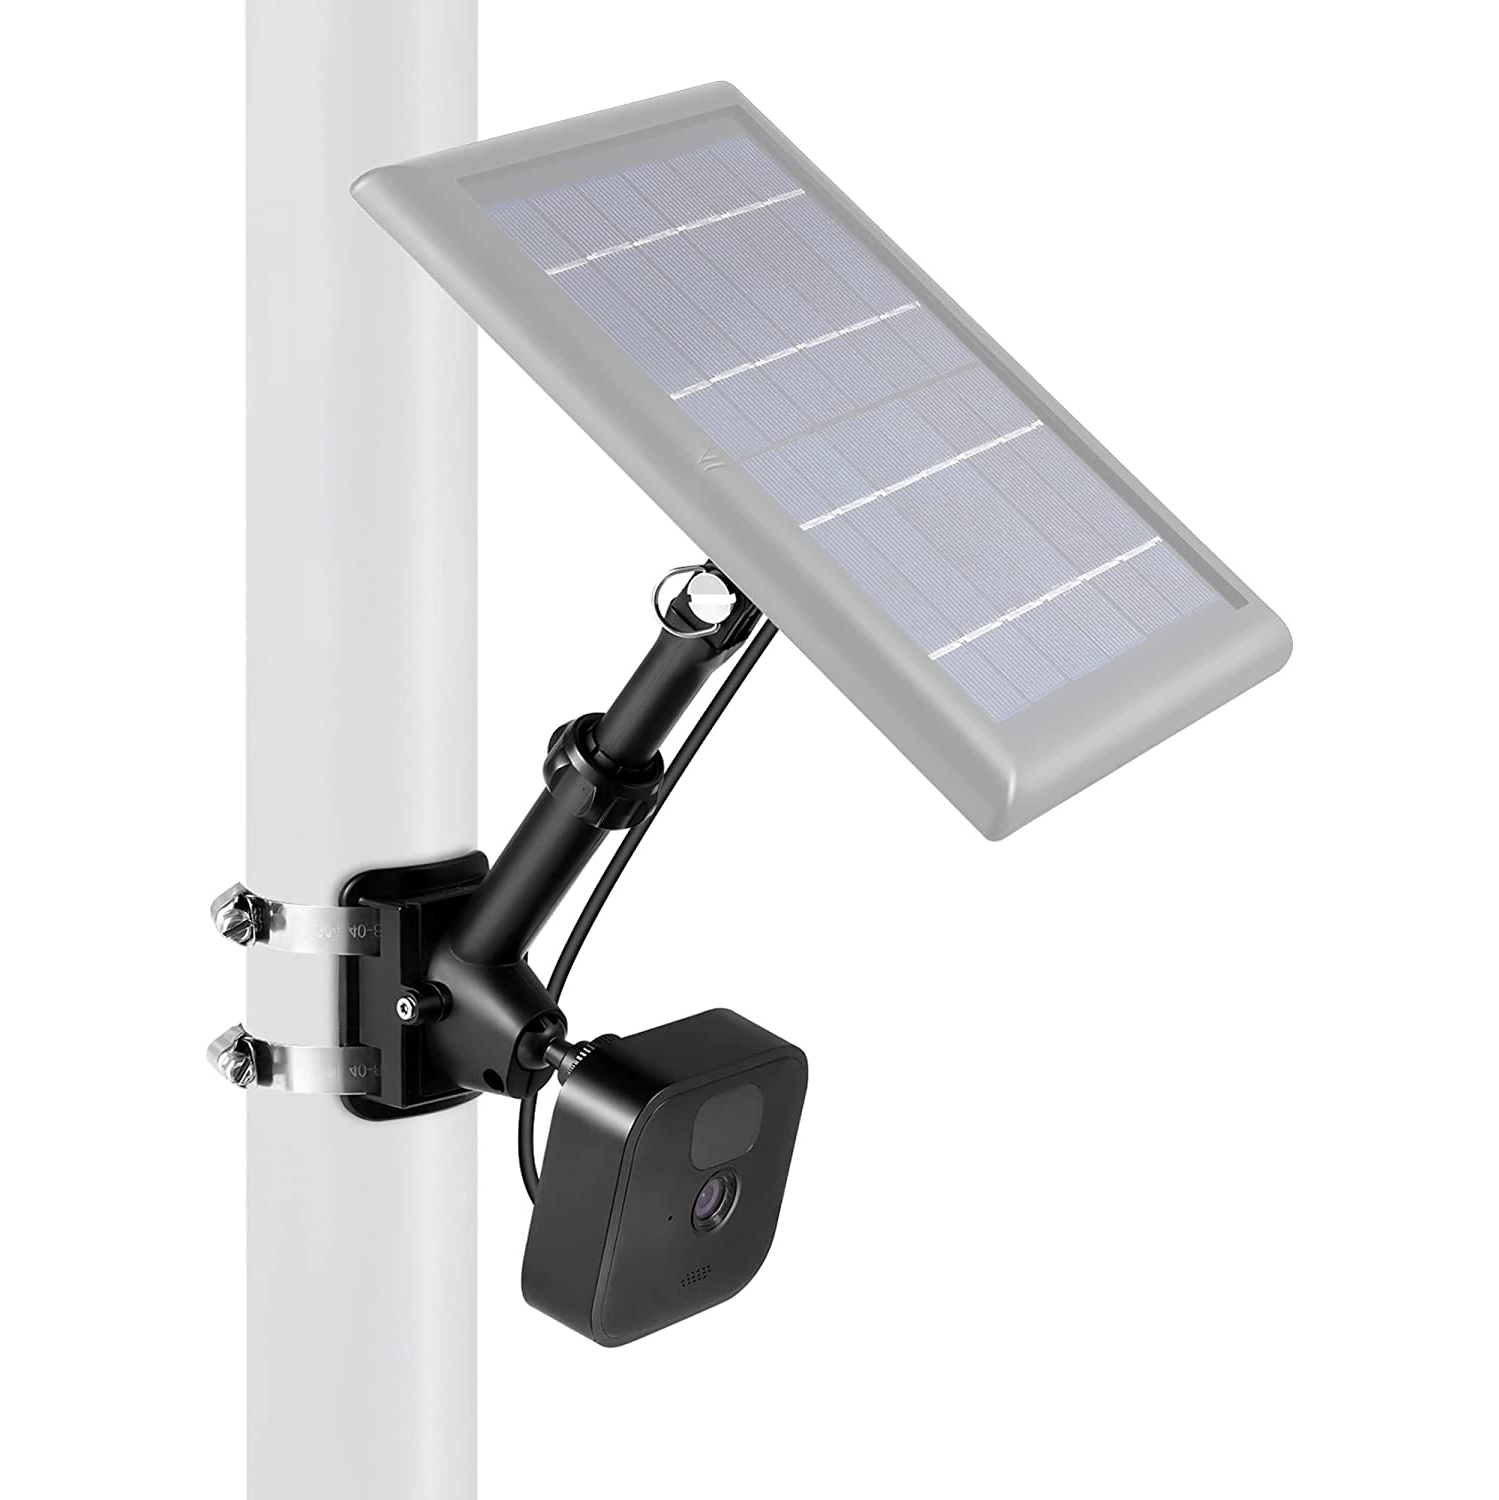 2-in-1 Universal Pole Mount for Camera & Solar Panel Compatible with Wyze, Blink, Ring, Arlo, Eufy Camera (Black)